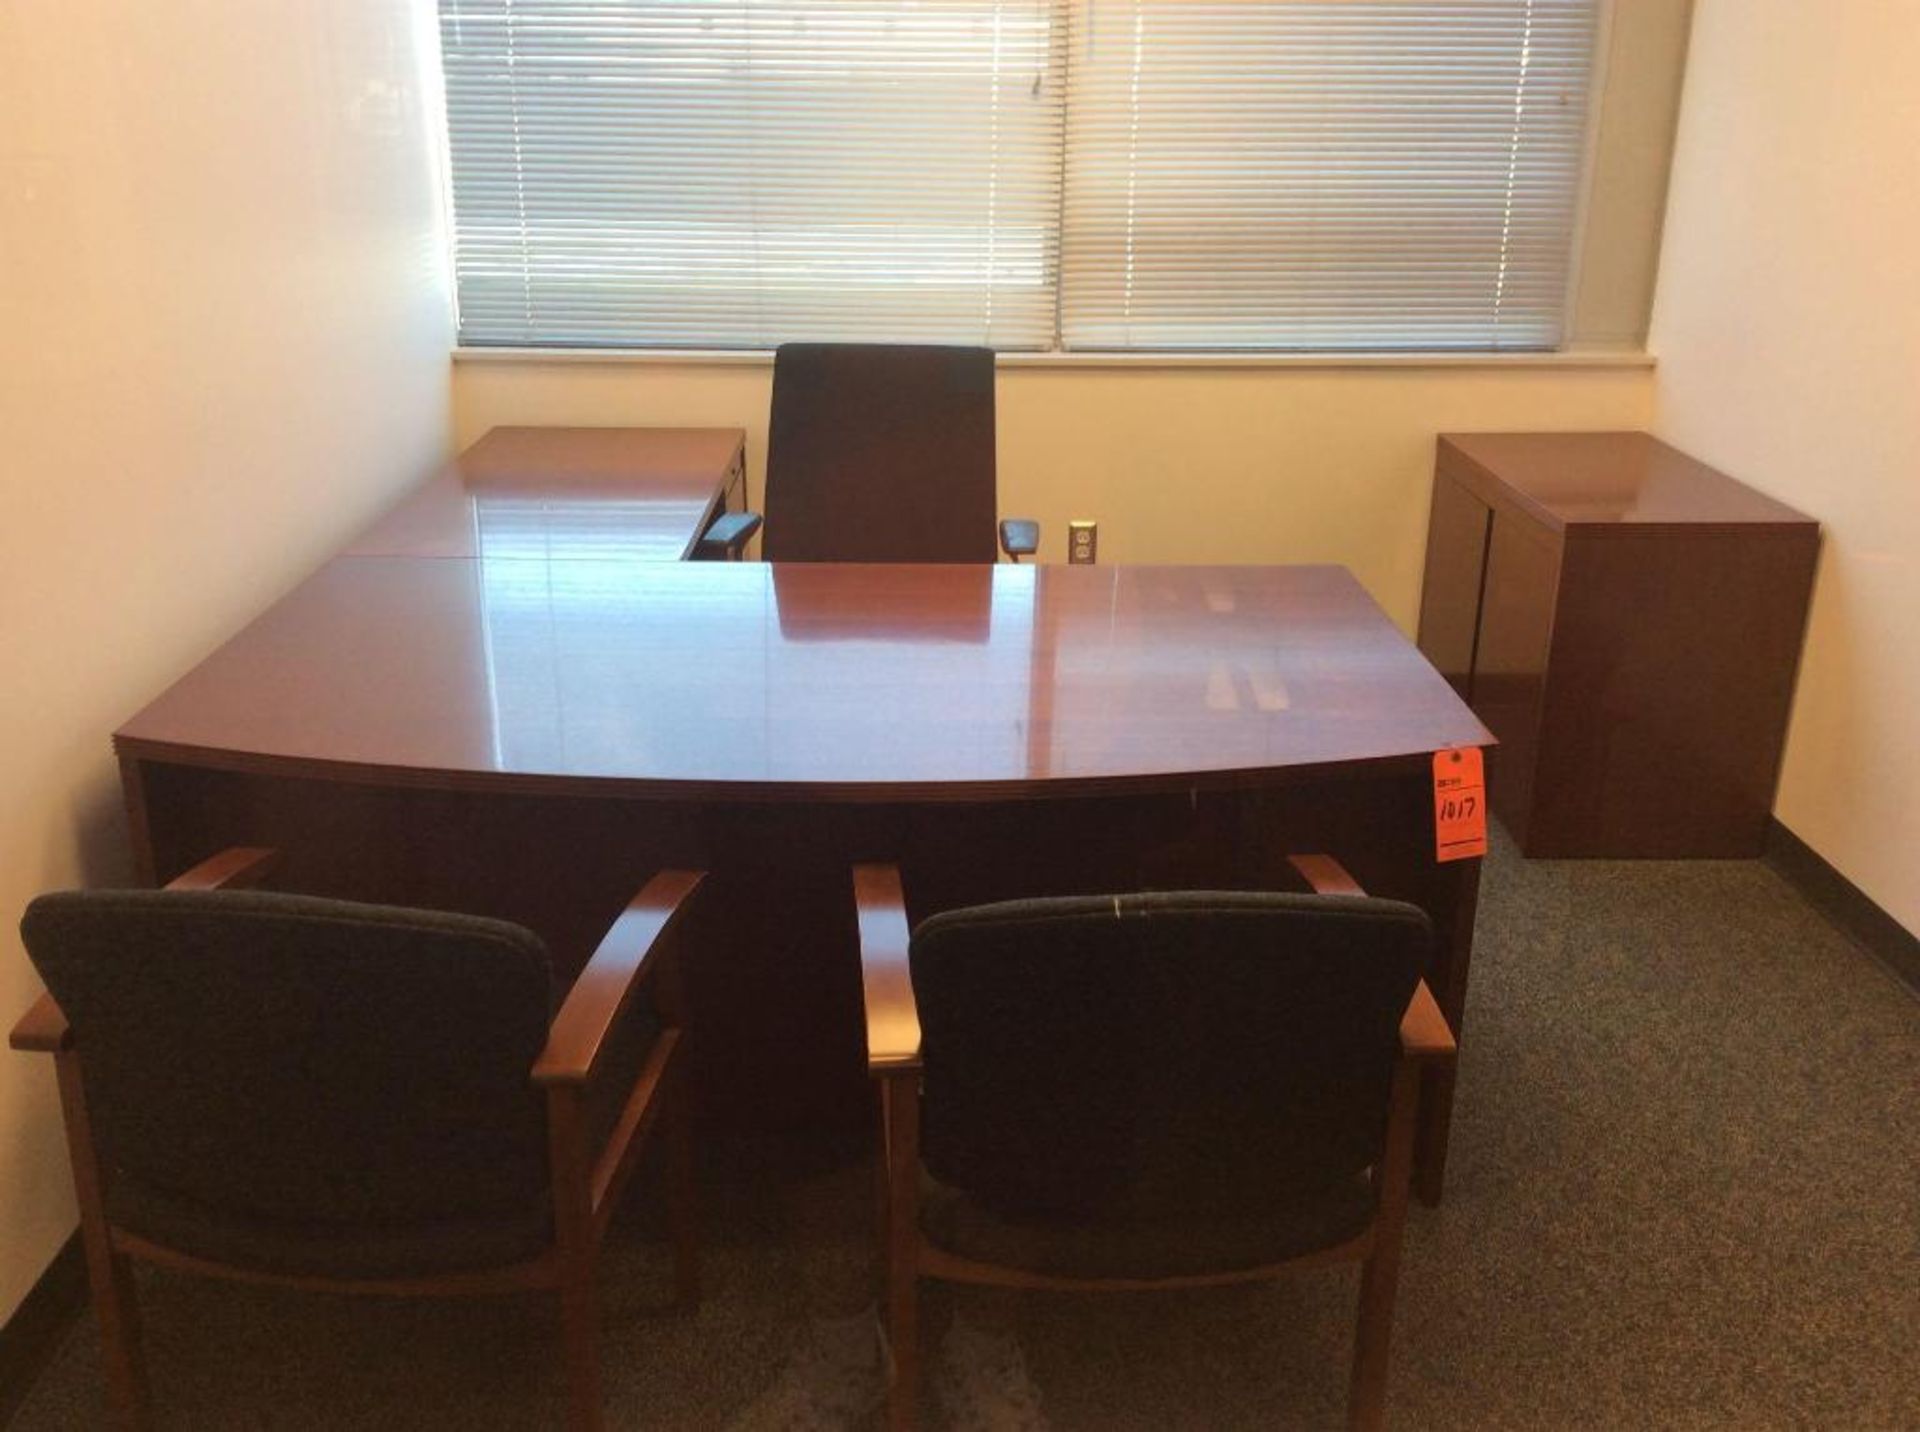 Office suite including executive desk with right hand return, executive chair, 3' wood storage cabin